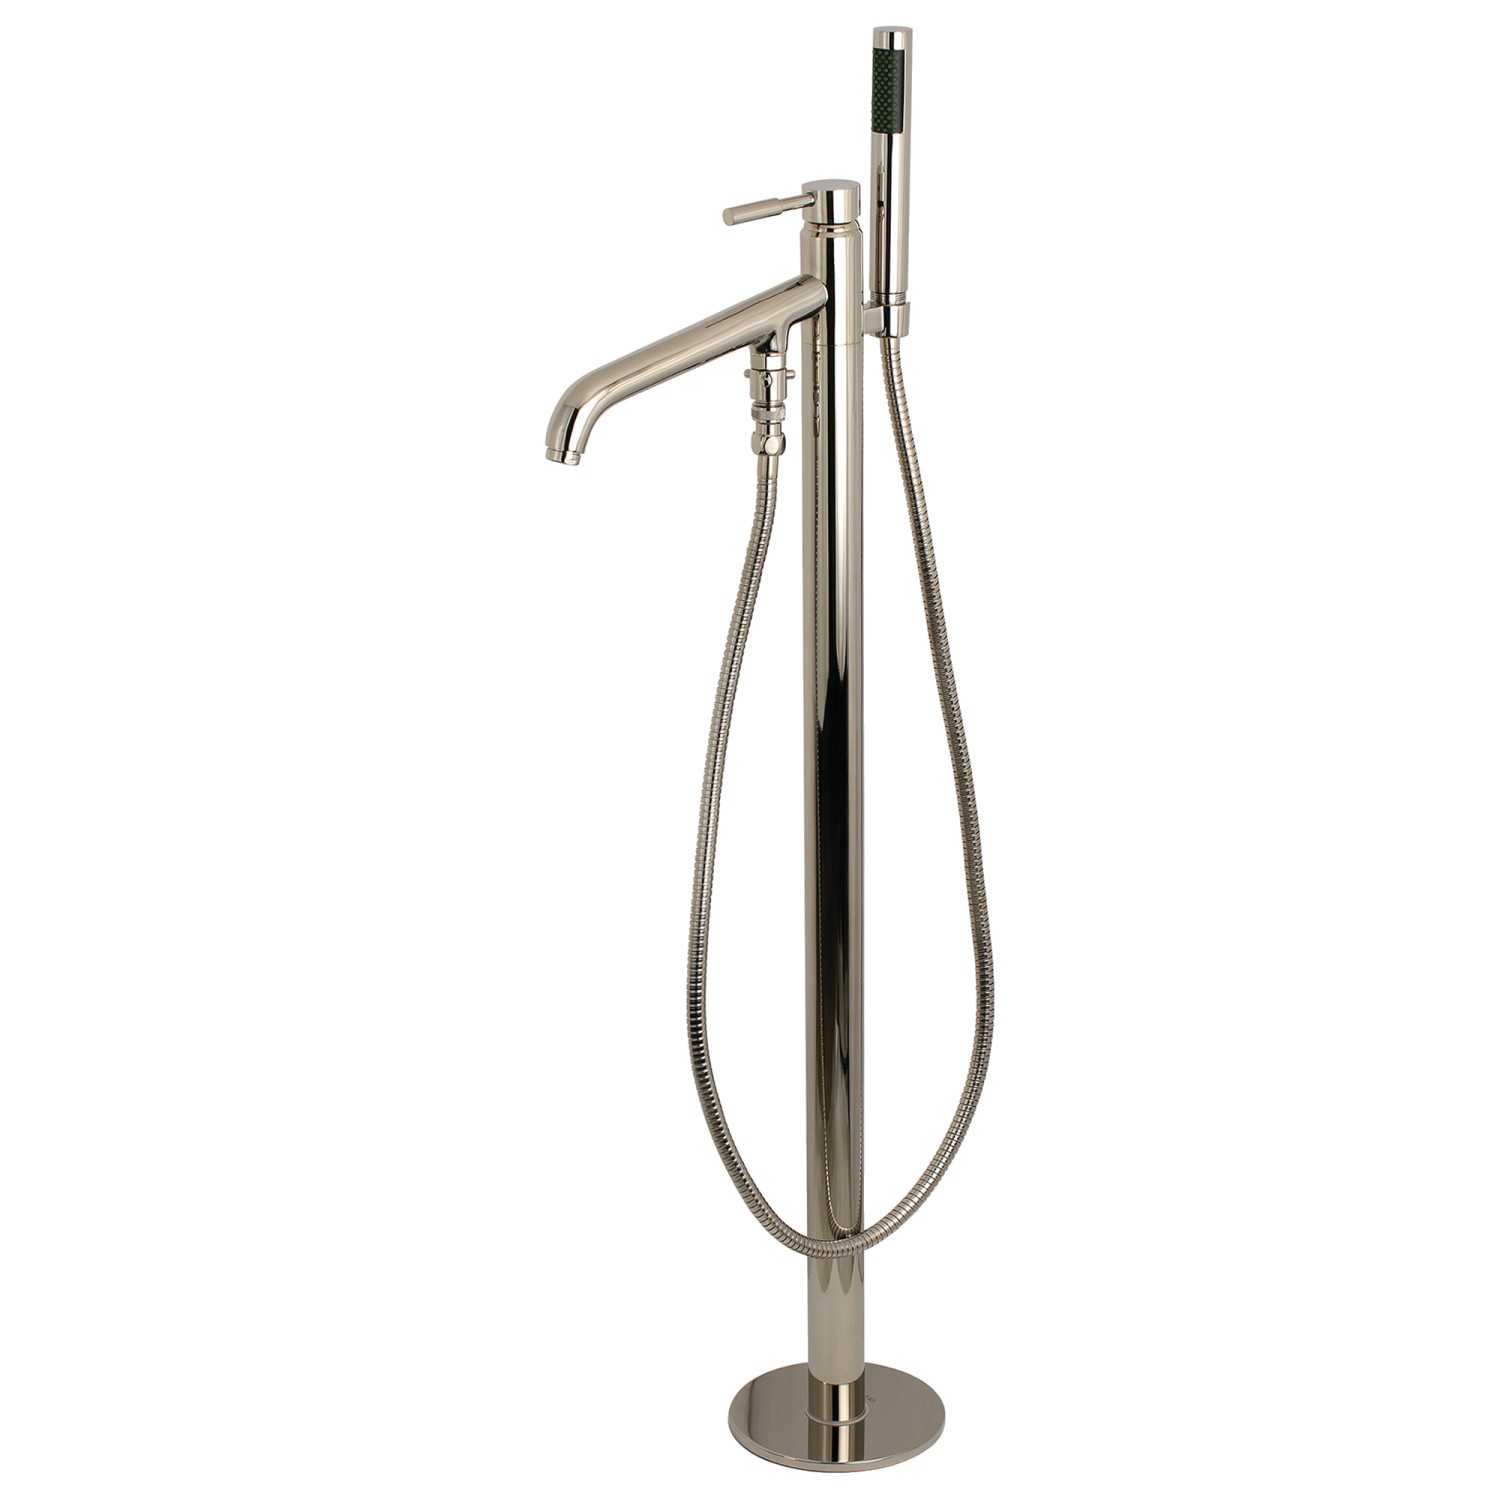 KINGSTON BRASS KS8136DL CONCORD FREESTANDING ROMAN TUB FILLER WITH HAND SHOWER IN POLISHED NICKEL